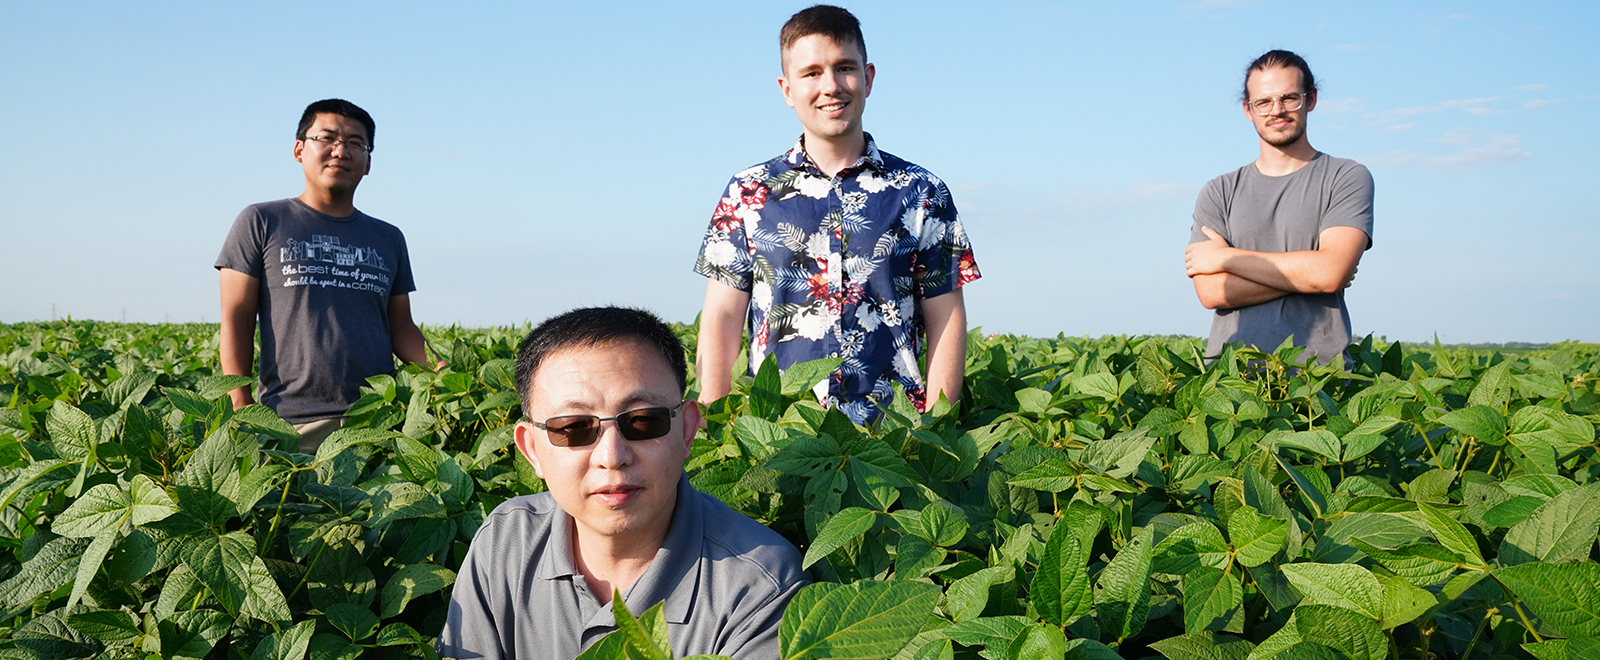 Researchers outdoors on a field (soybean plantation)